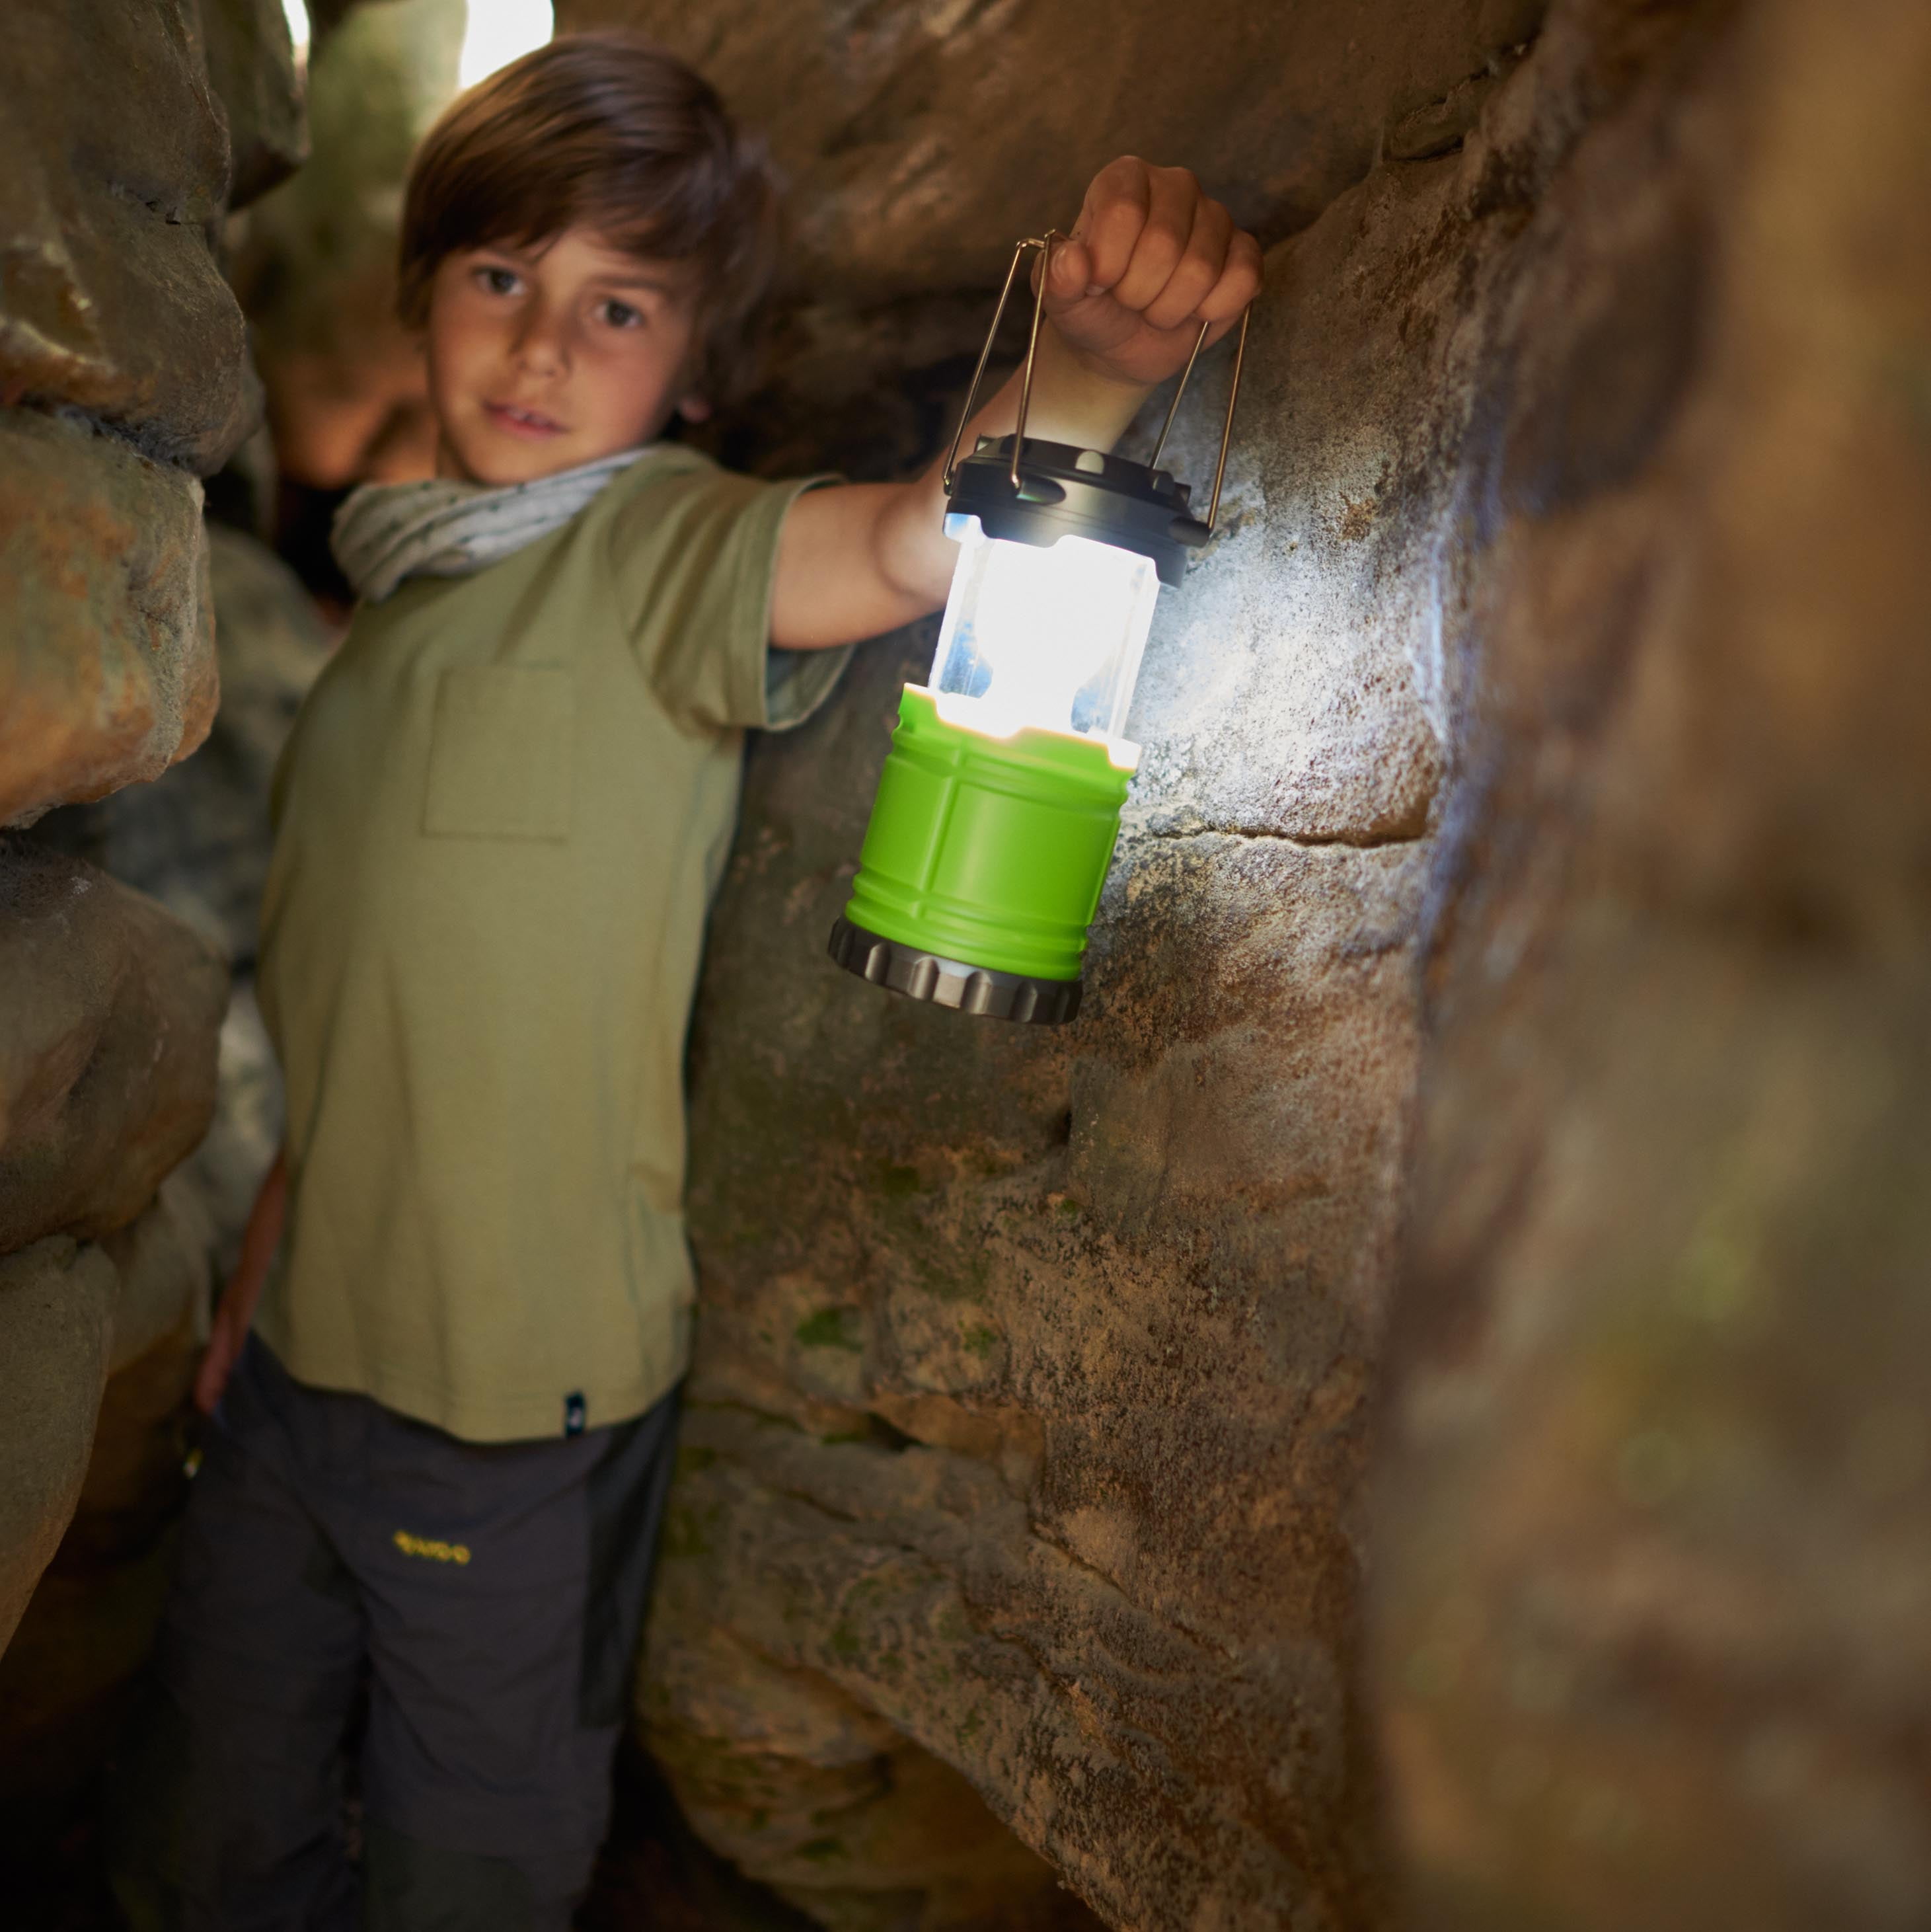 Terra Kids Camping Lantern - For Small Hands